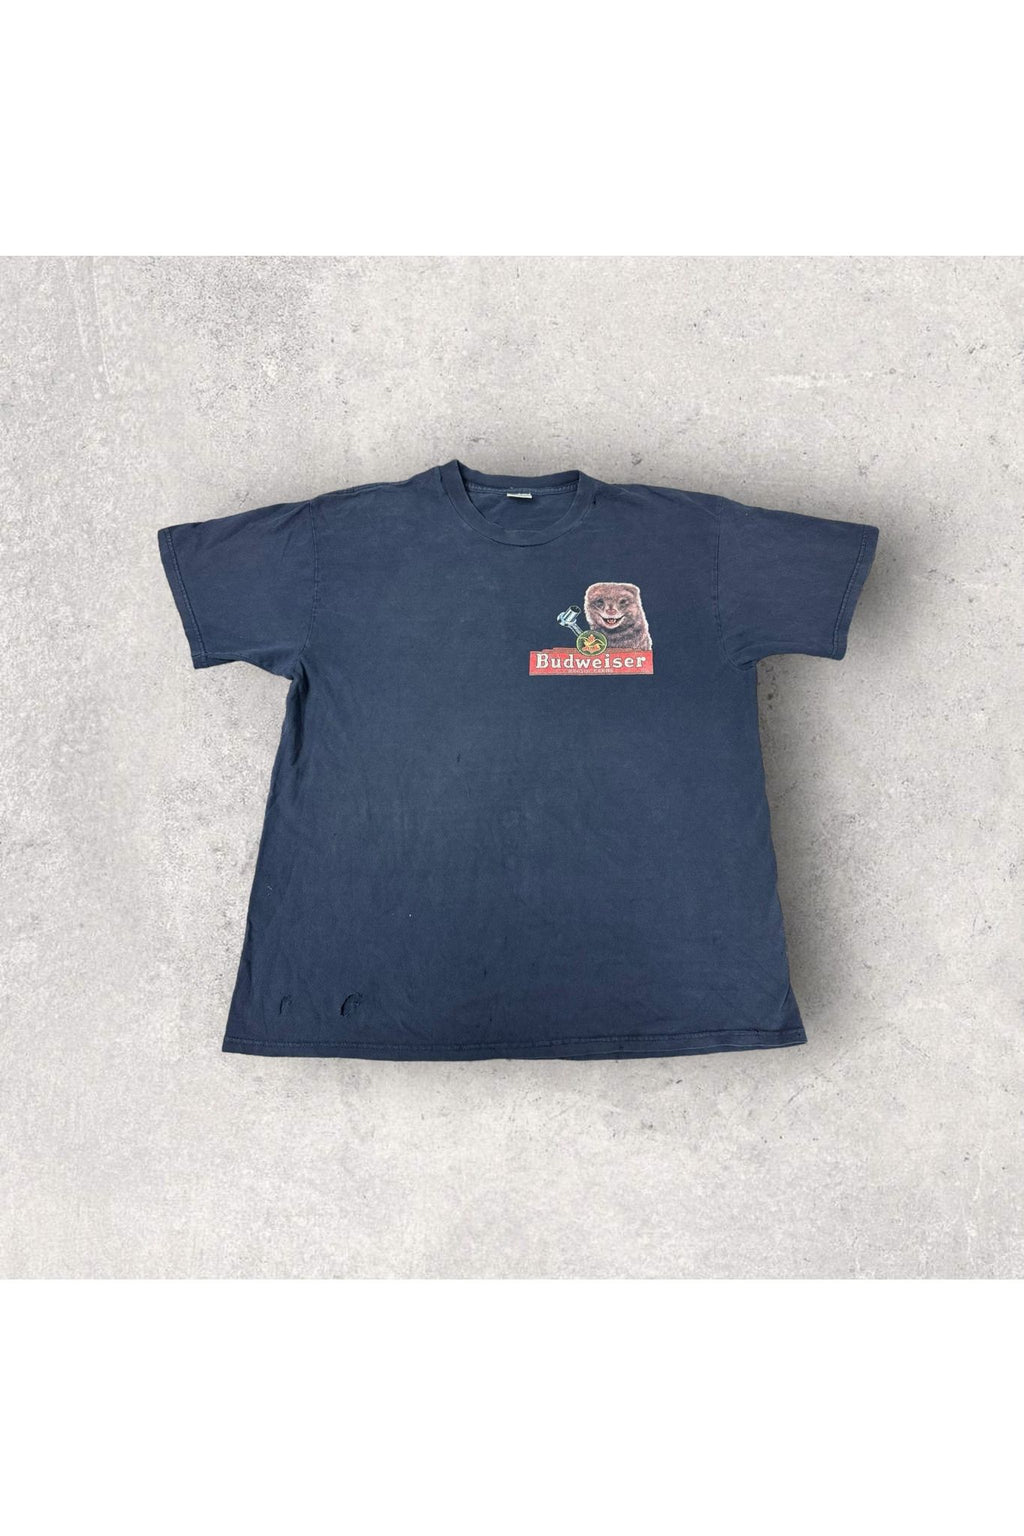 Vintage 1998 Budweiser This Is The Best Day of My Life! Tee- XL